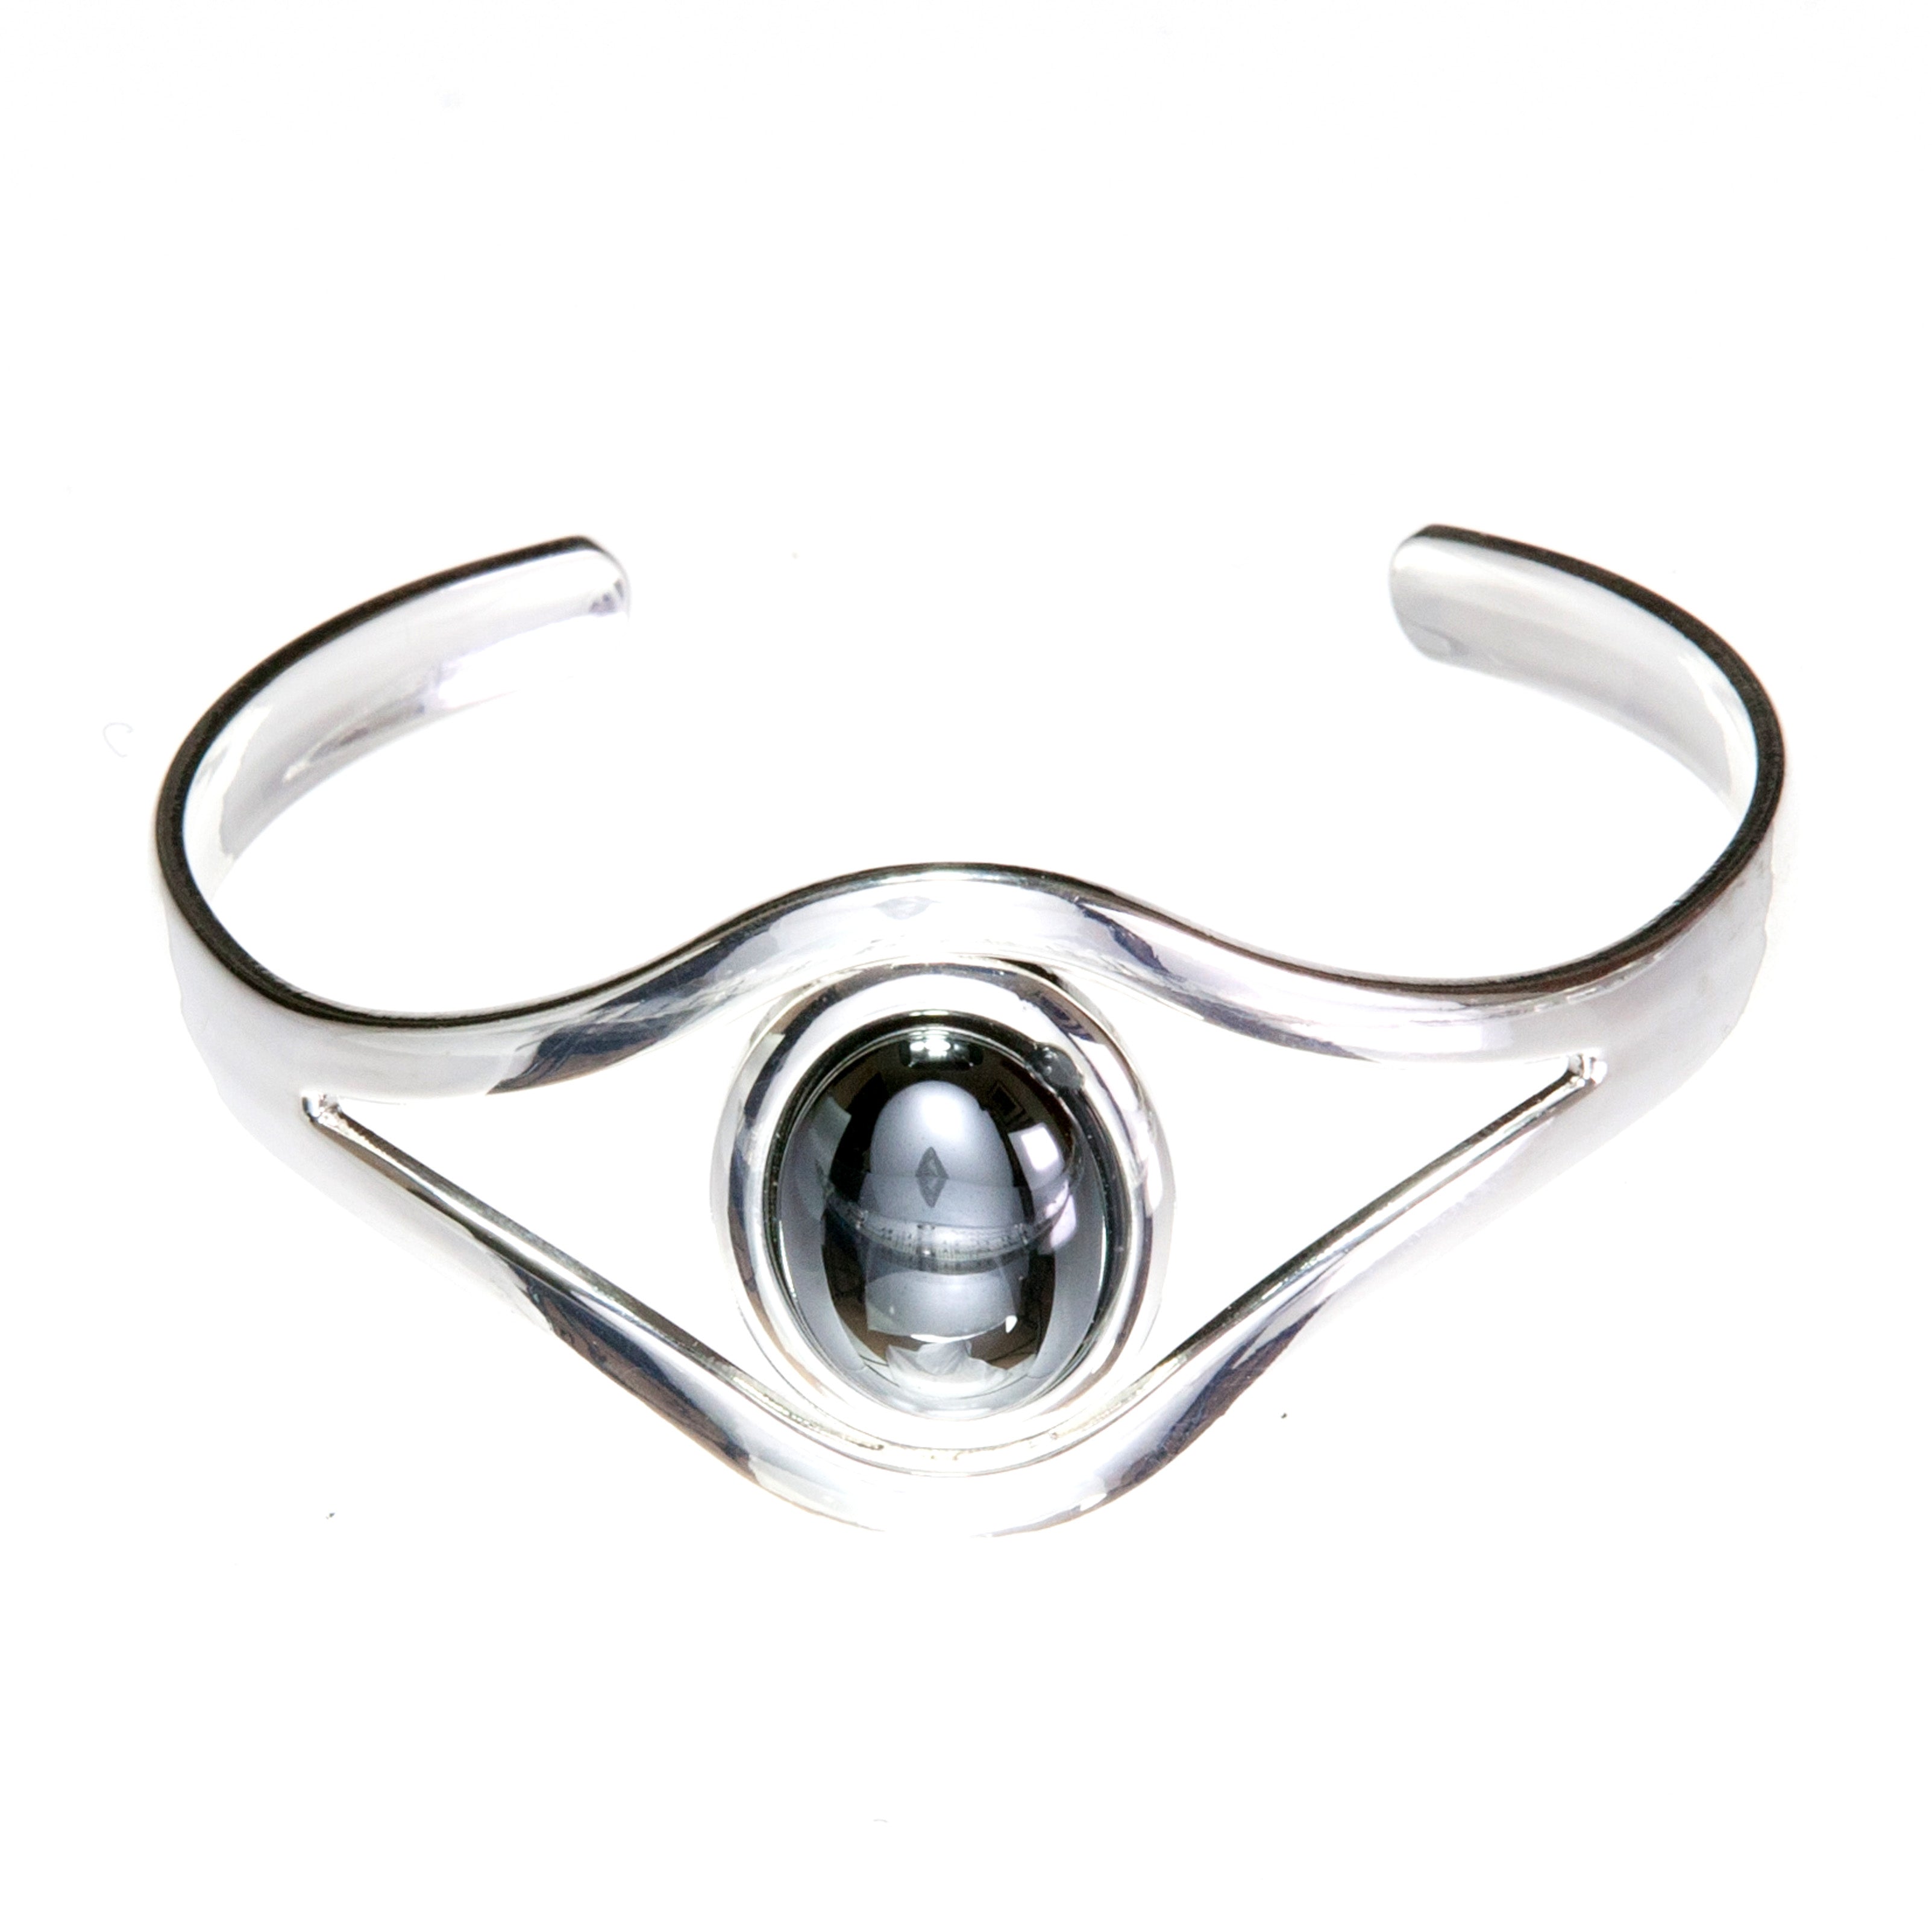 Hematite Grey Adjustable silver plated Bangle/Cuff with an 18 x 13mm cabochon